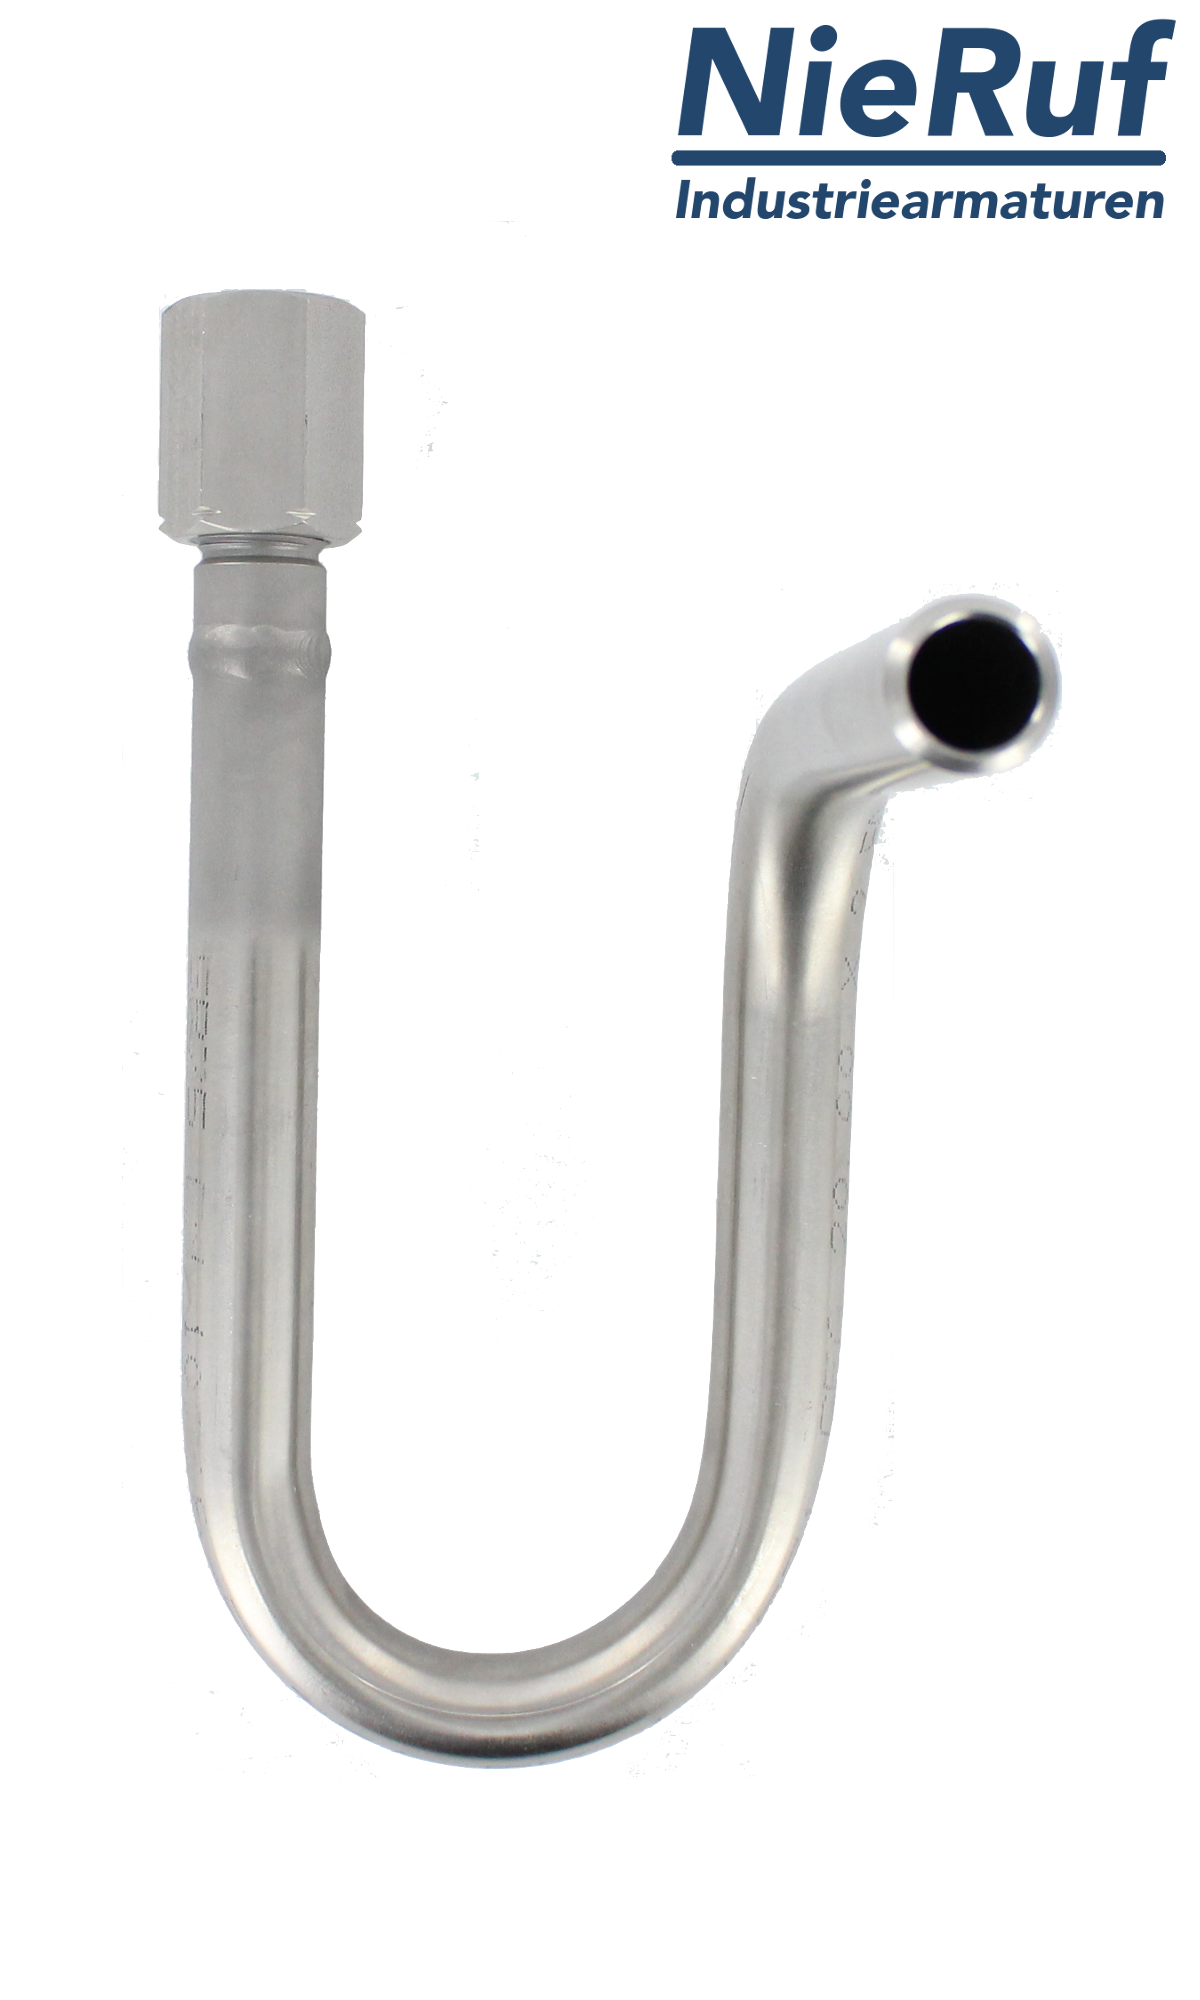 siphon acc. to DIN 16282 - form B stainless steel 1.4571 in U-shape 1/2"